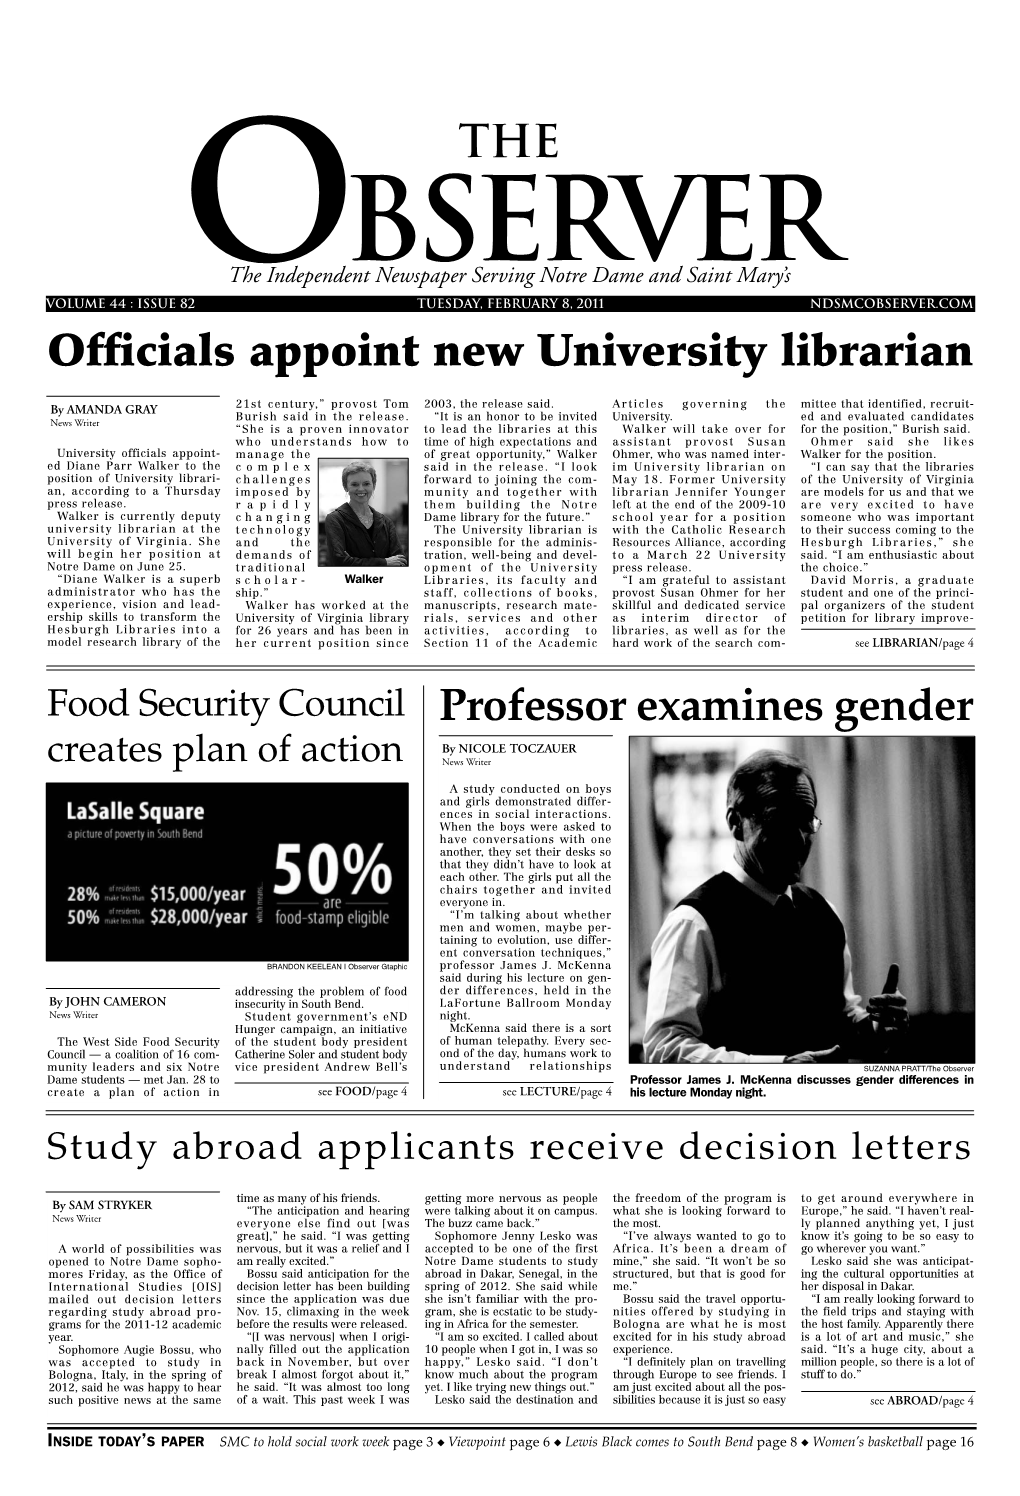 Officials Appoint New University Librarian Professor Examines Gender